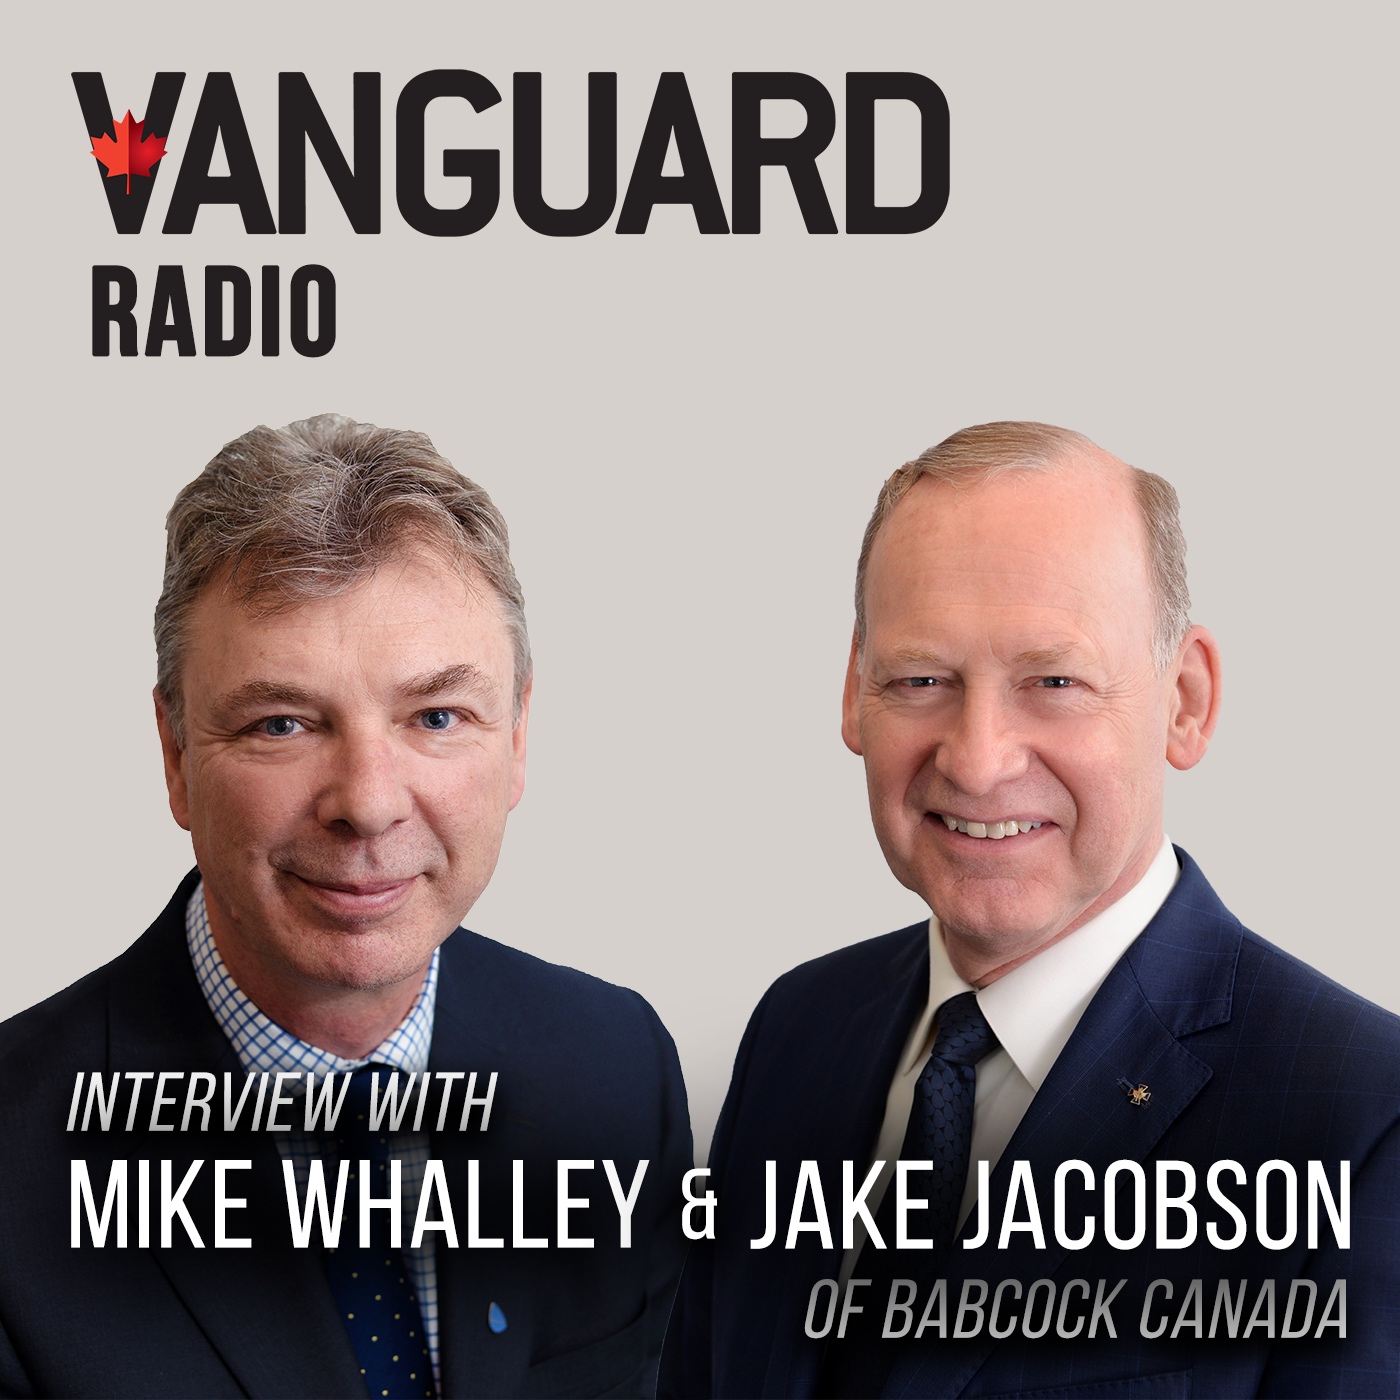 Mike Whalley and Jake Jacobson of Babcock talk submarines, aerial firefighting and expansion in Canada